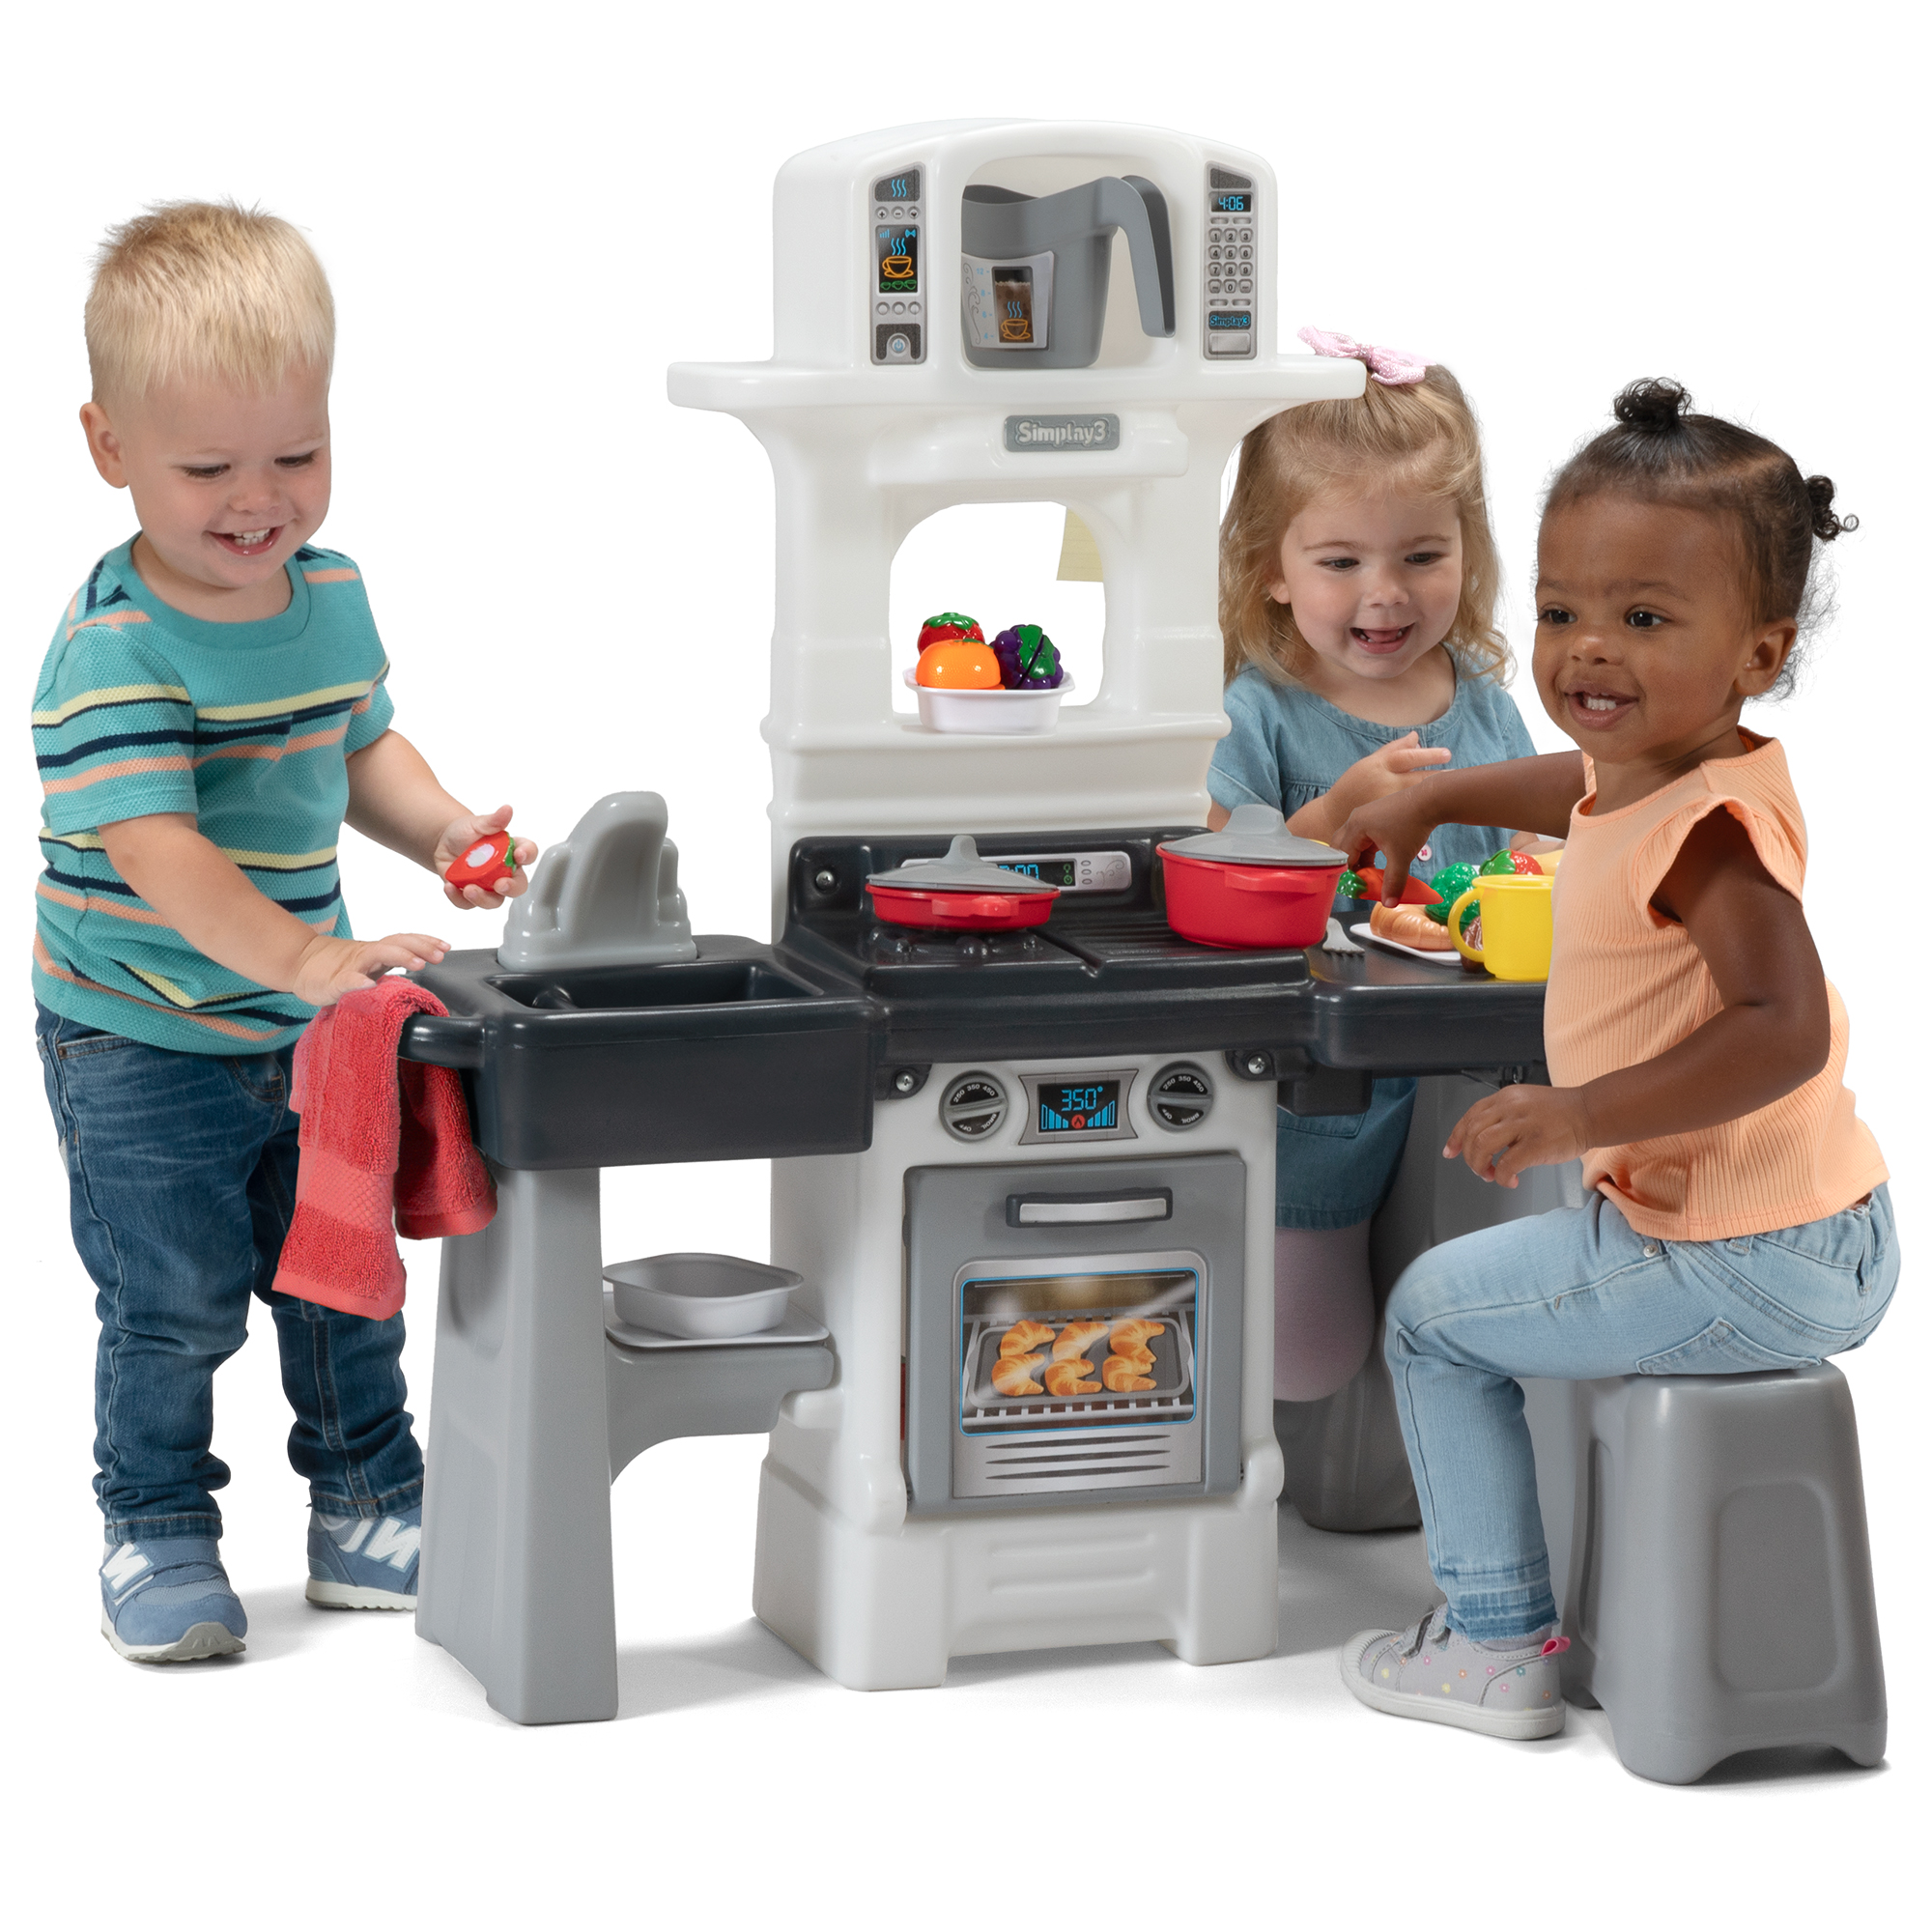 Cooking Kids Dine-in Kitchen and food set with table and chairs for toddlers by simplay3 